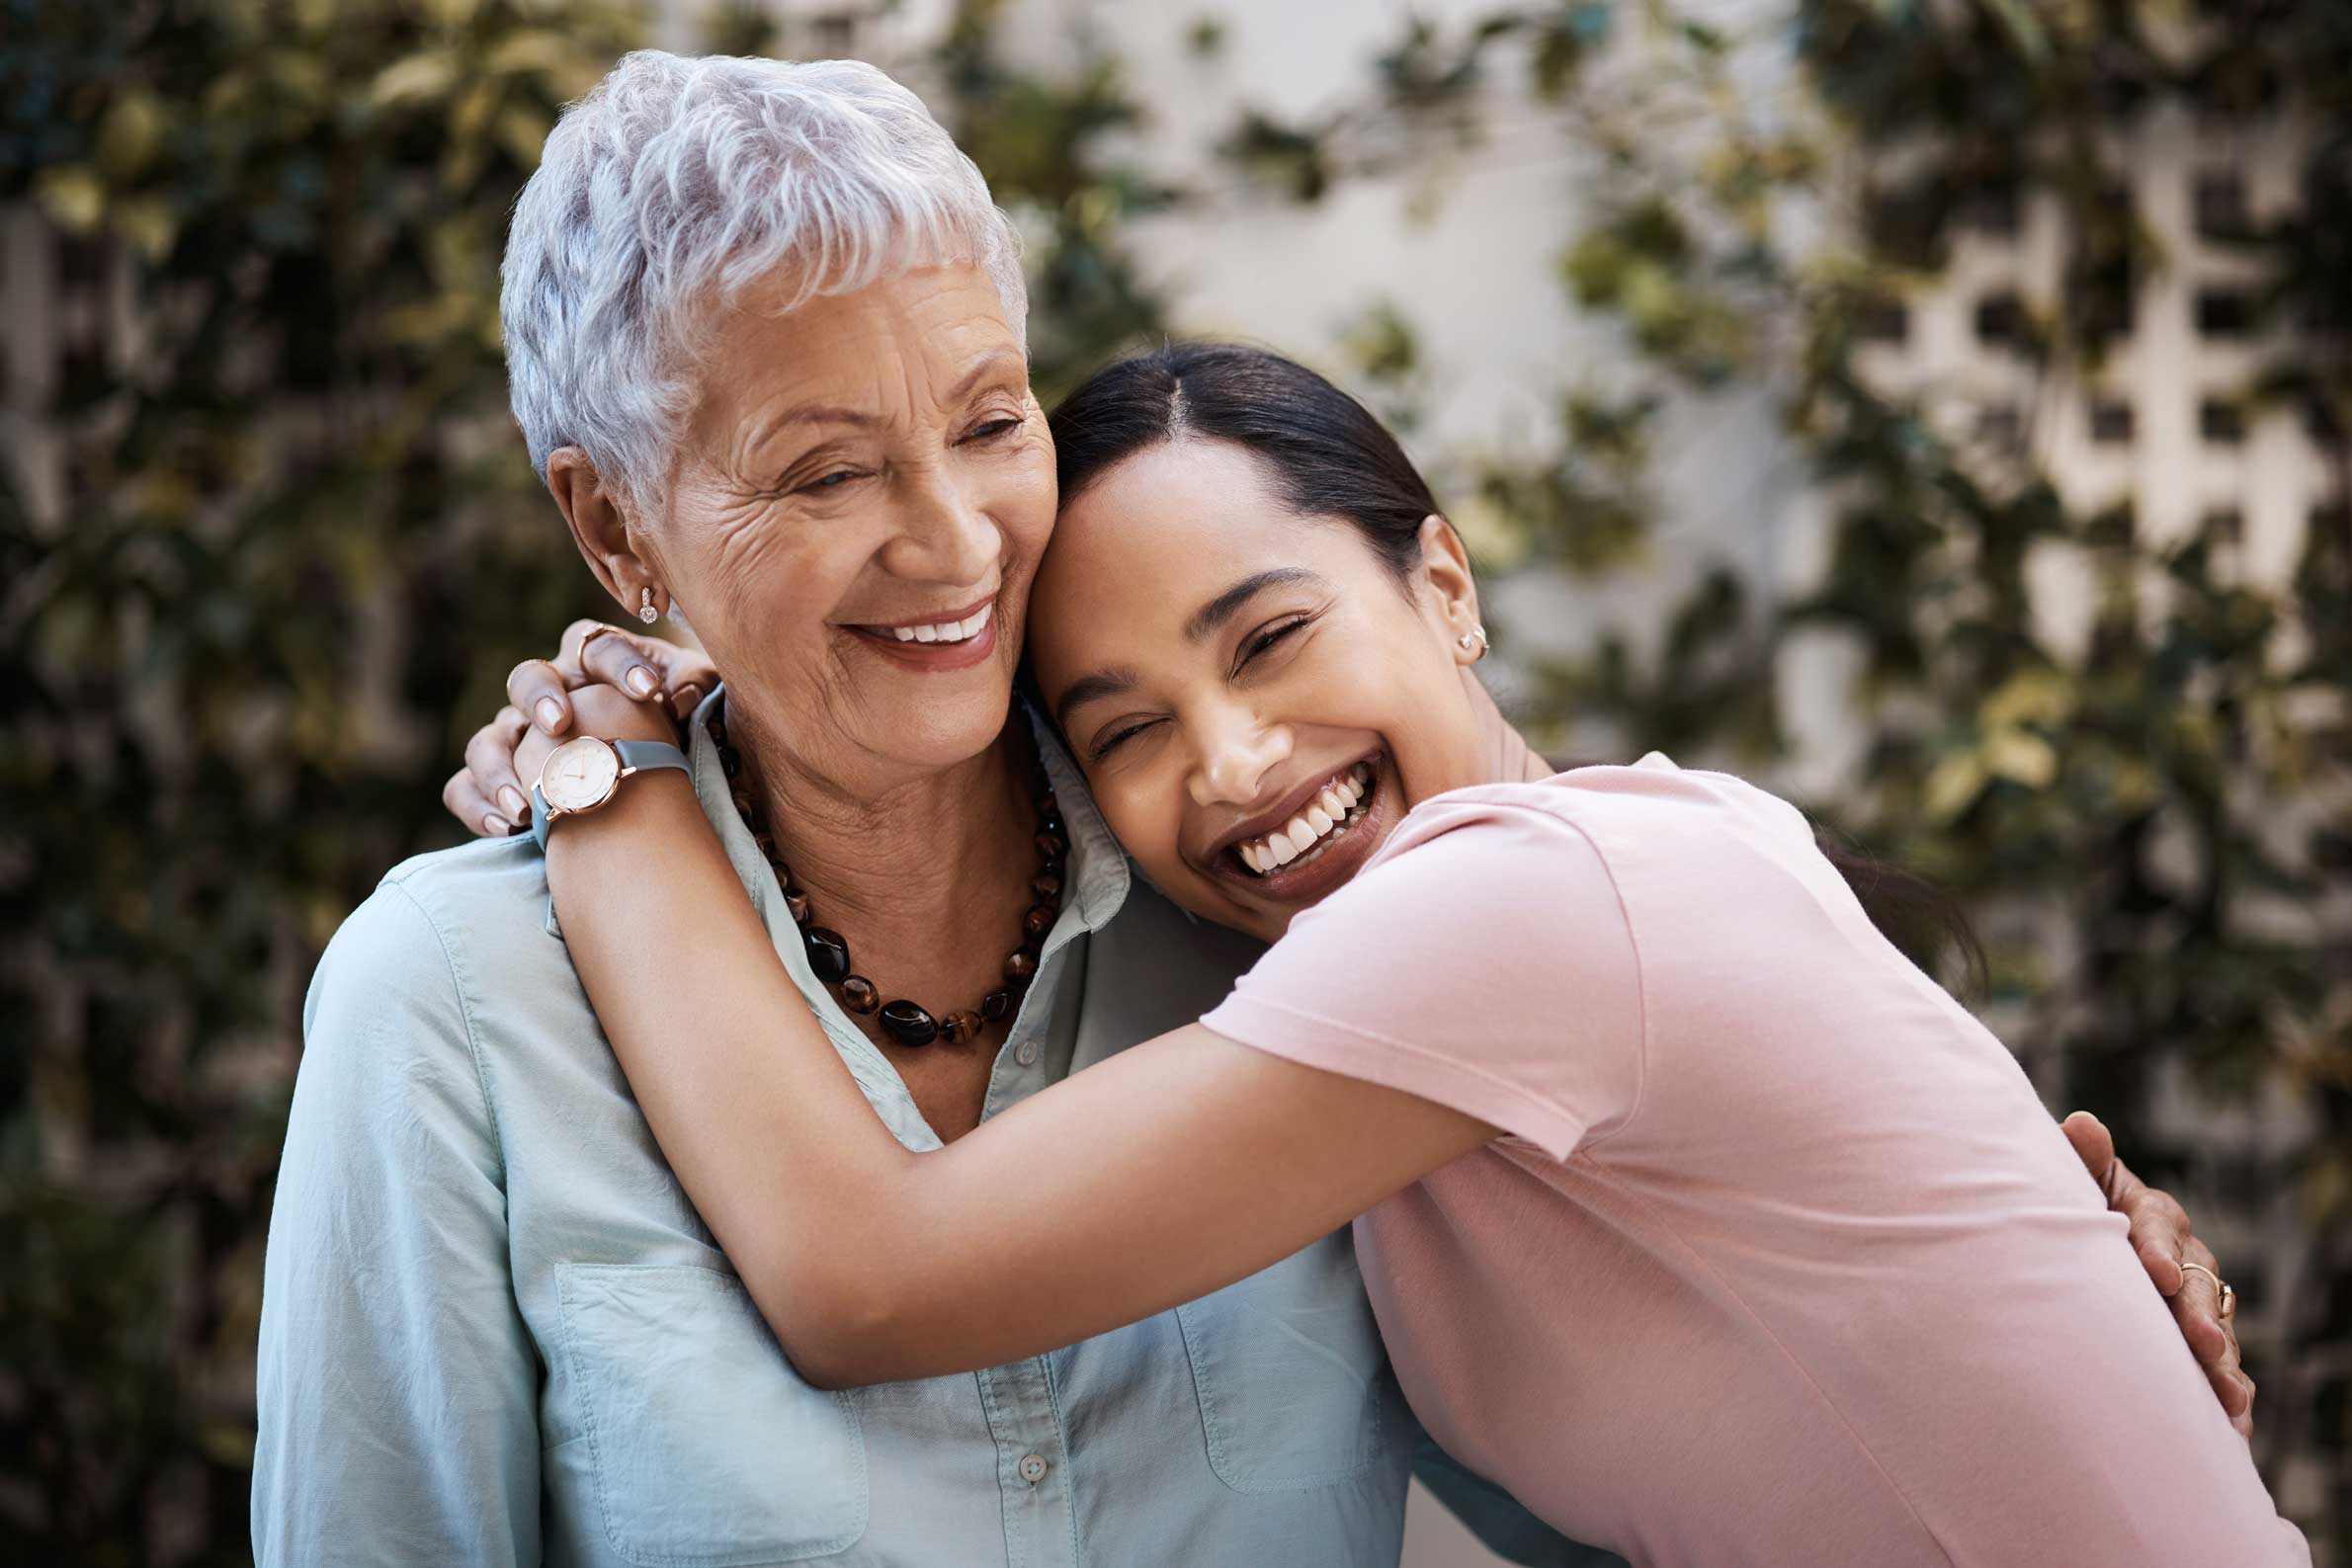 A younger woman hugging an elderly woman affectionately.